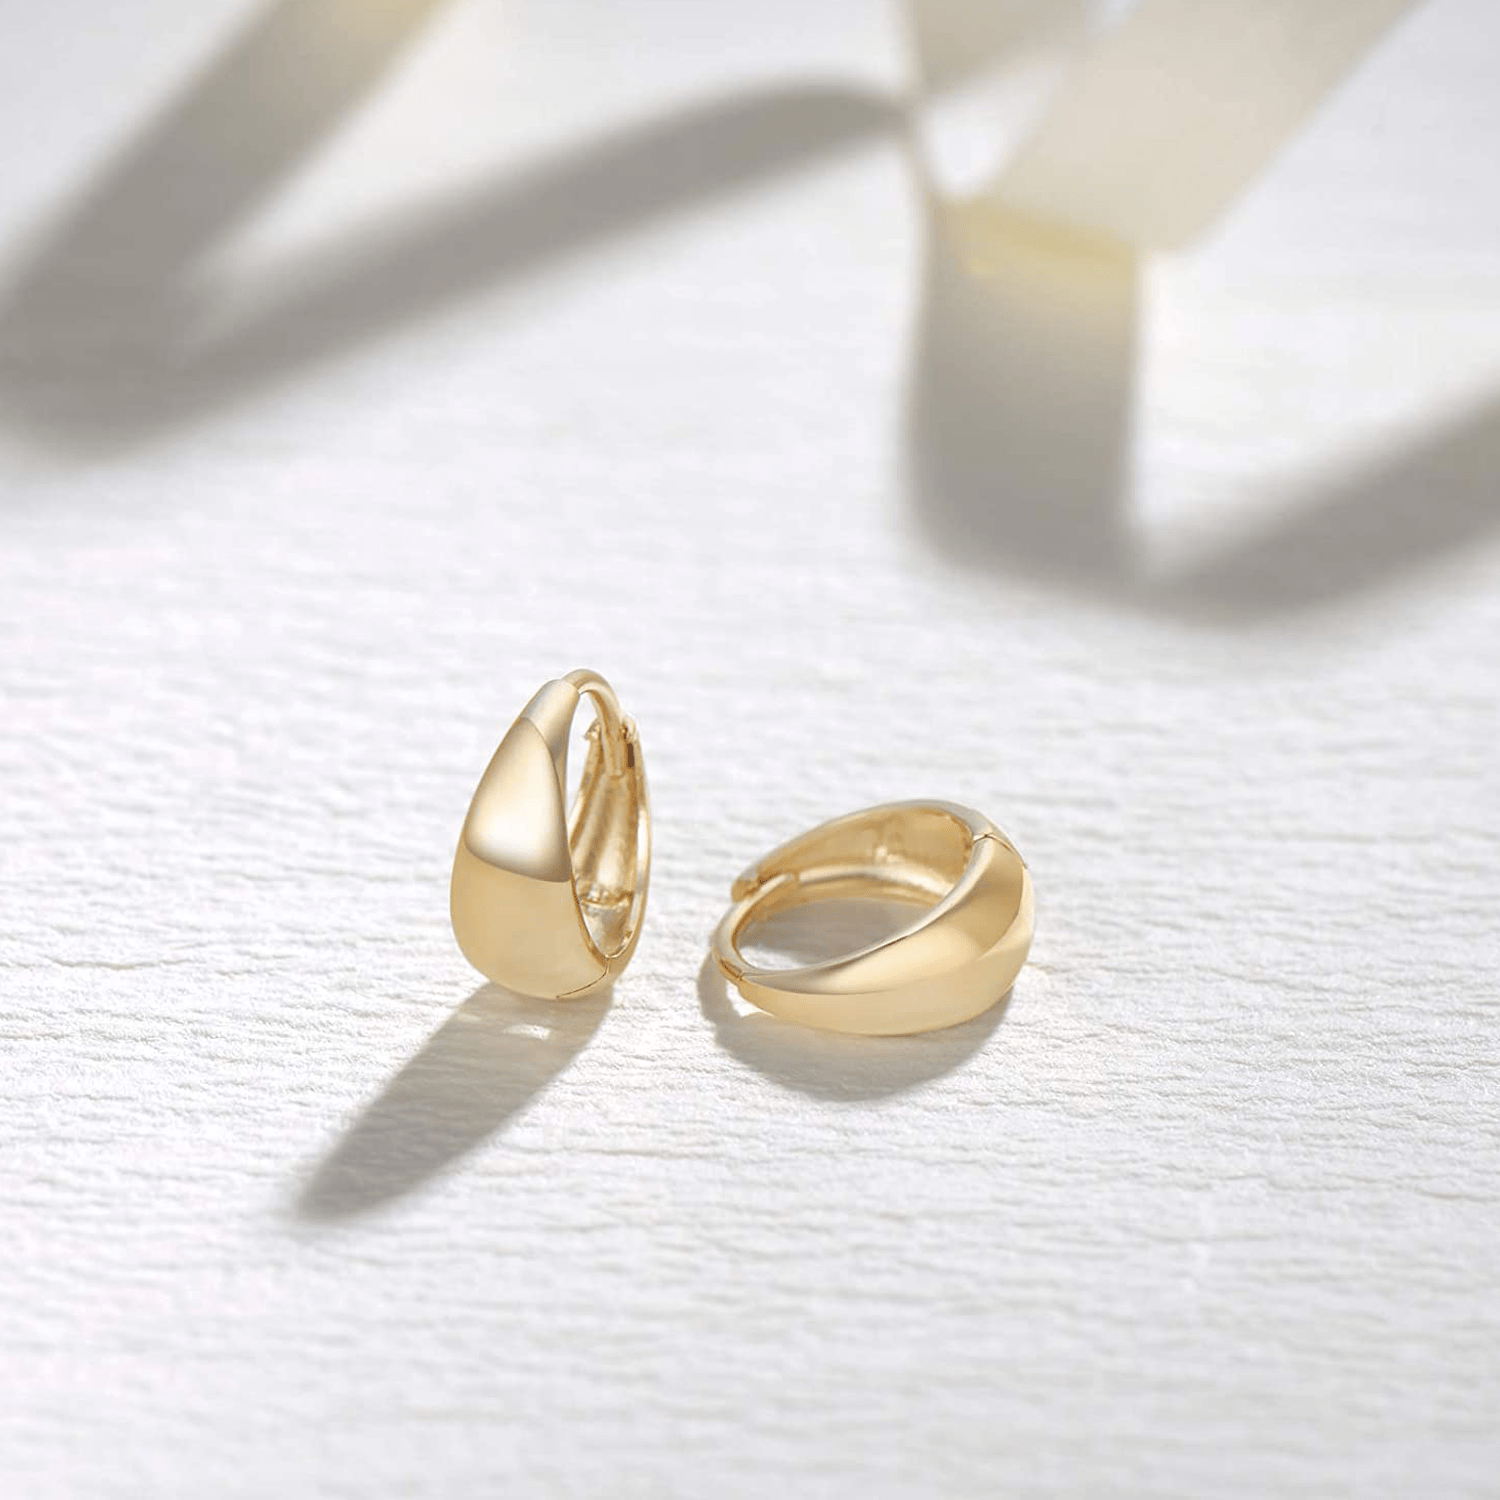 FANCIME Small Tapered 14K Yellow Gold Hoop Earrings Show